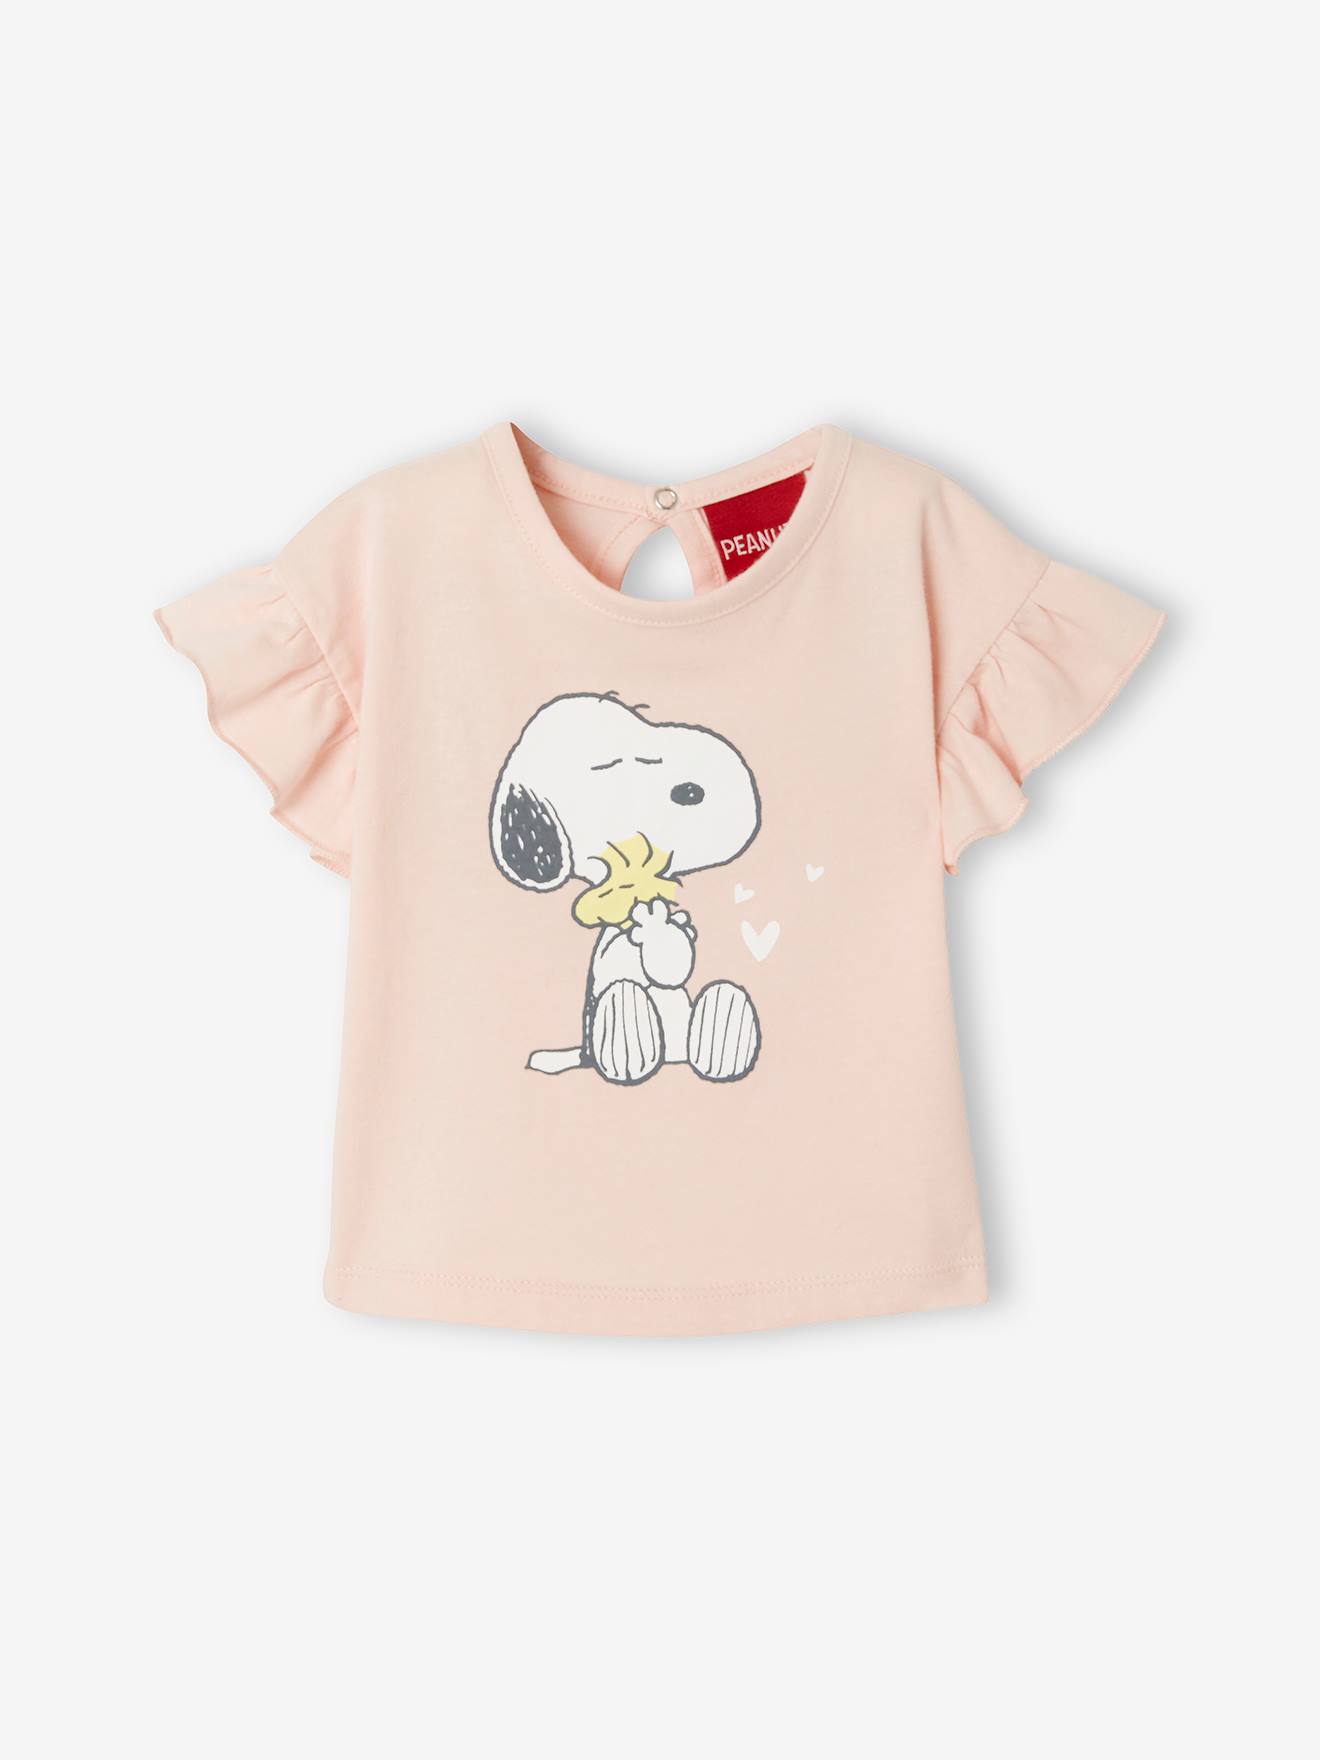 Snoopy T-Shirt for Baby Girls, by Peanuts(r) pink medium solid with desig